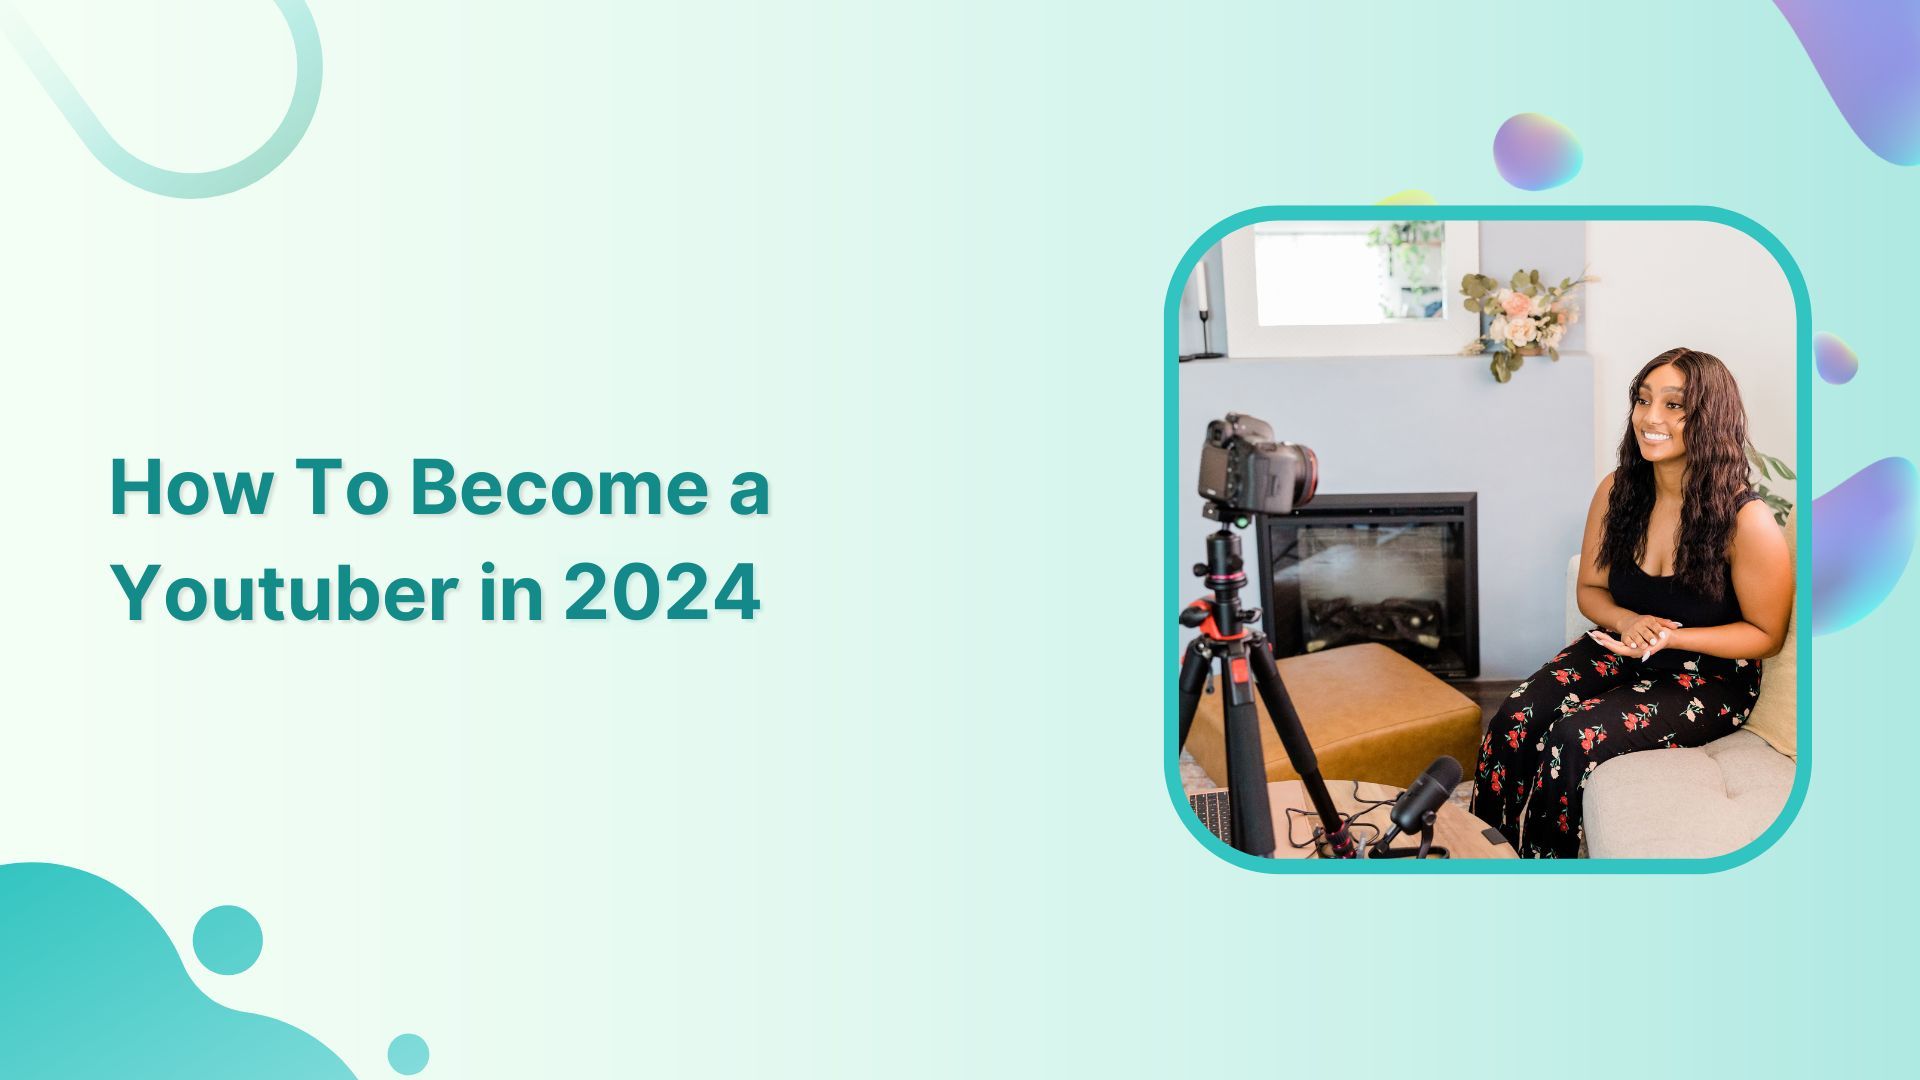 How to Become a Youtuber & Make Money in 2024